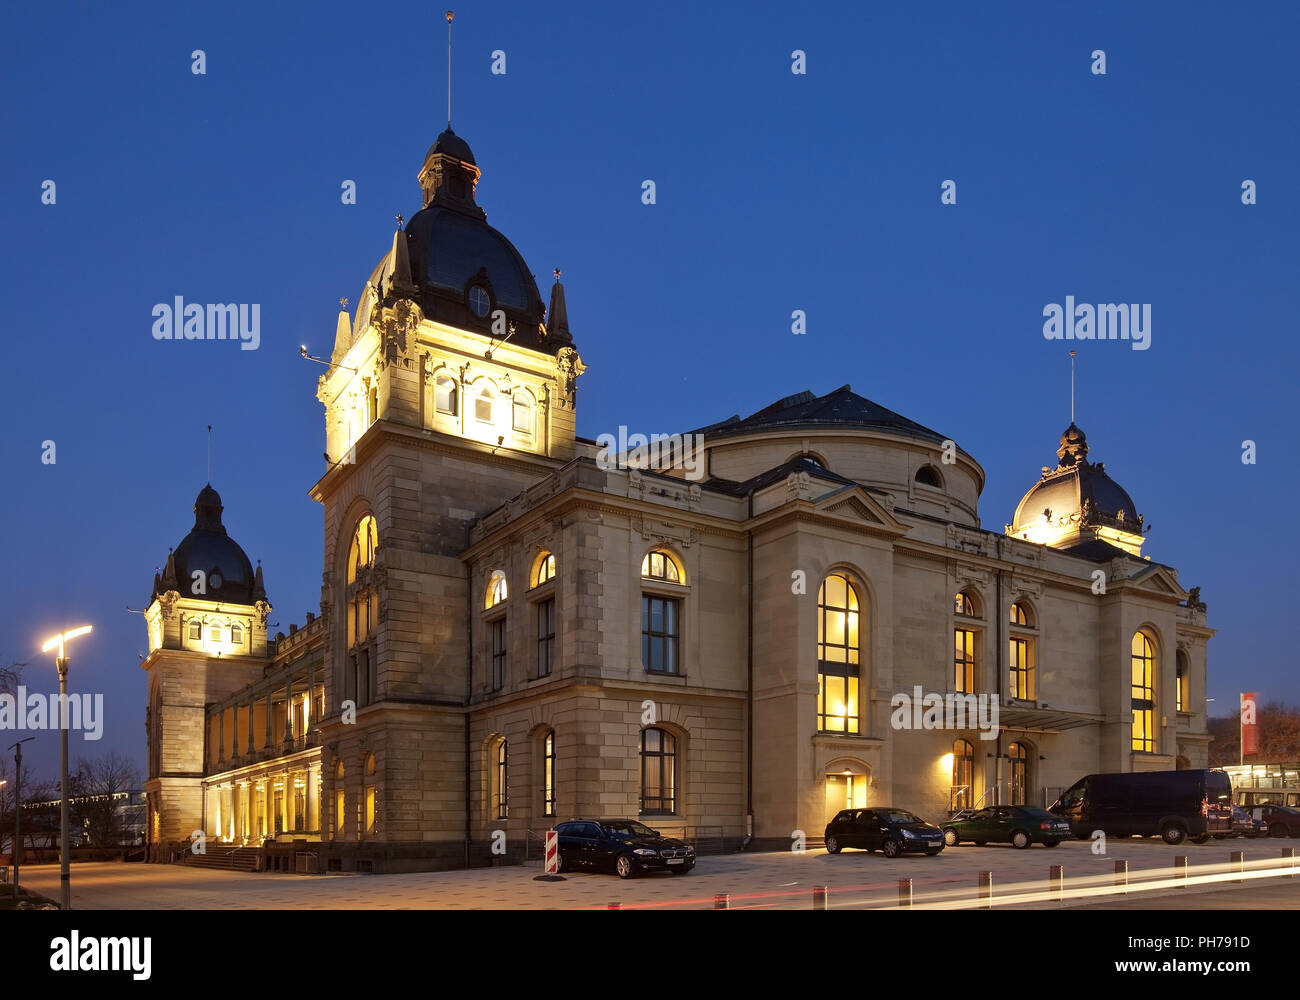 historic town hall in the evening, Wuppertal, Bergisches Land, North Rhine-Westphalia, Germany Stock Photo